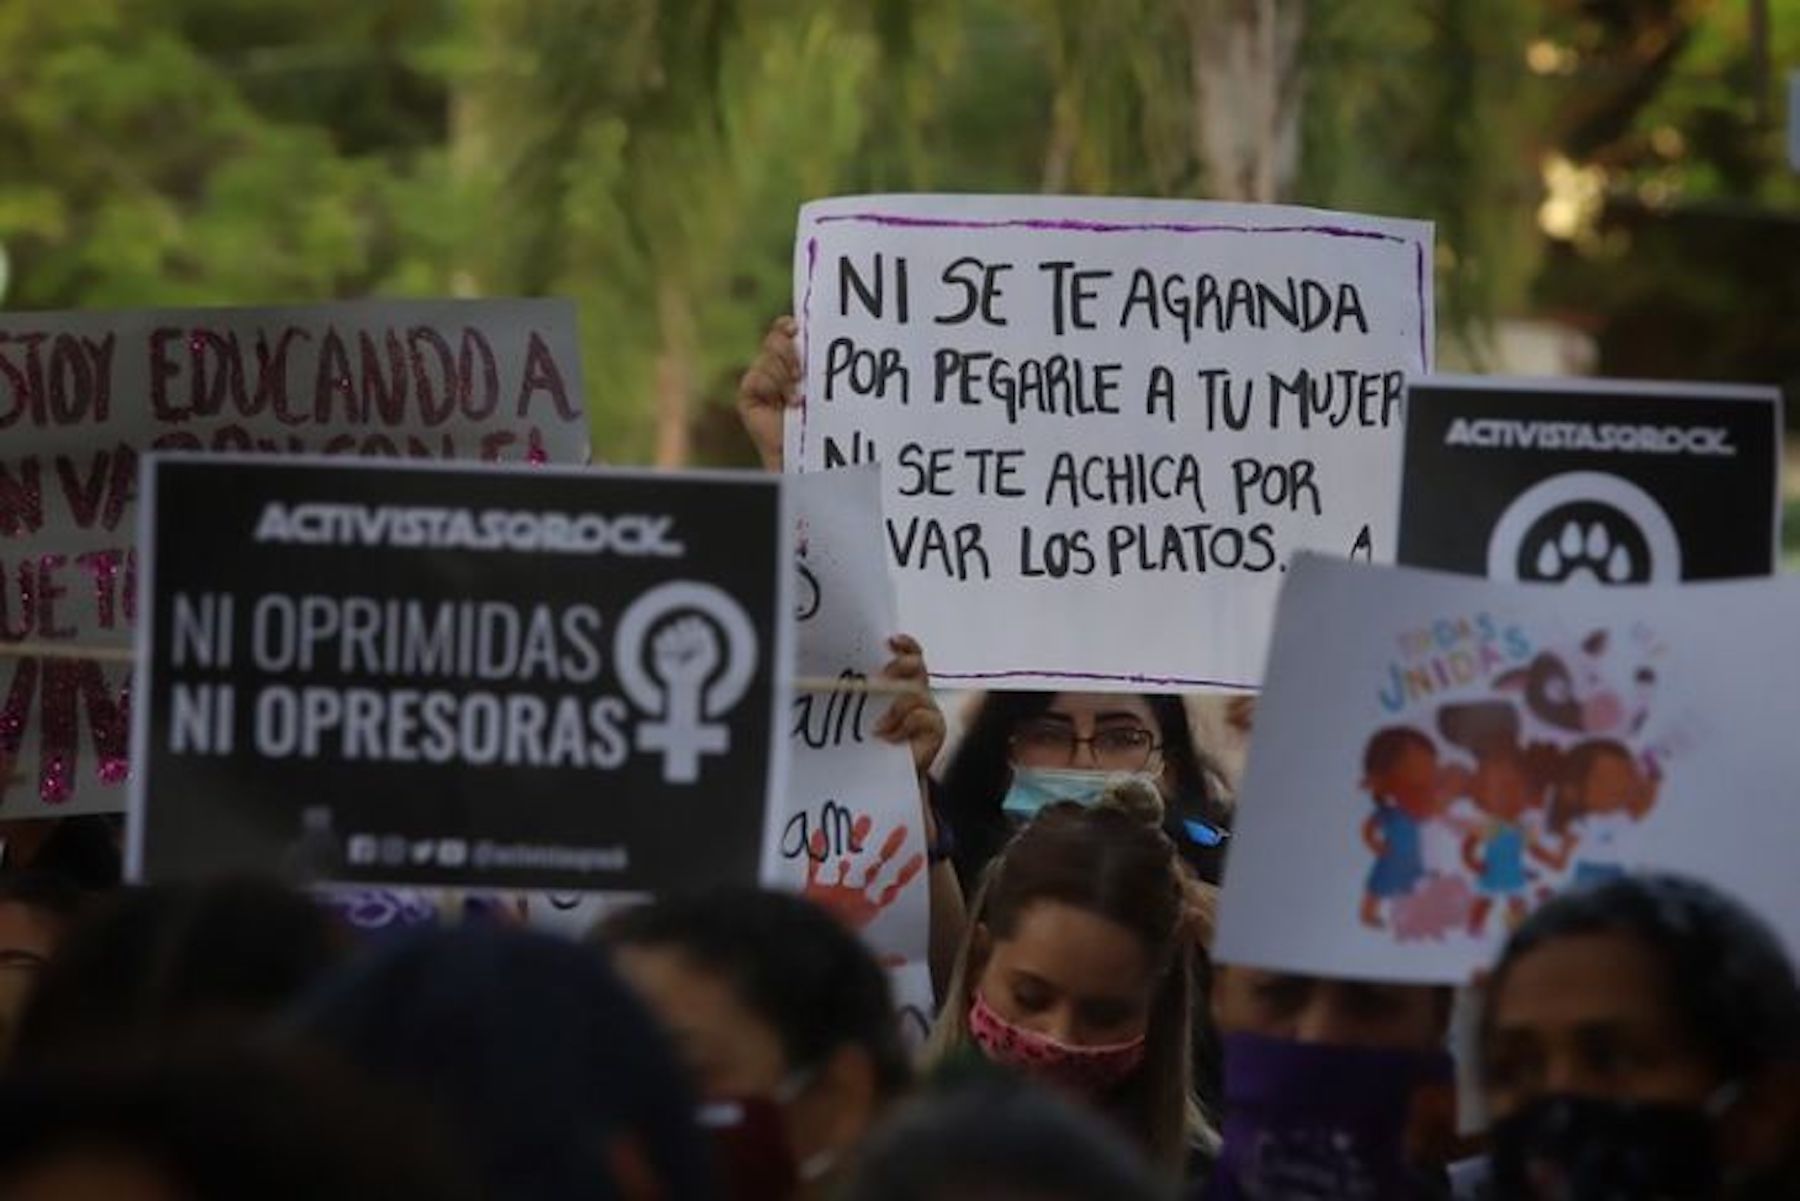 Demonstration: anti-speciesism and feminism are interconnected